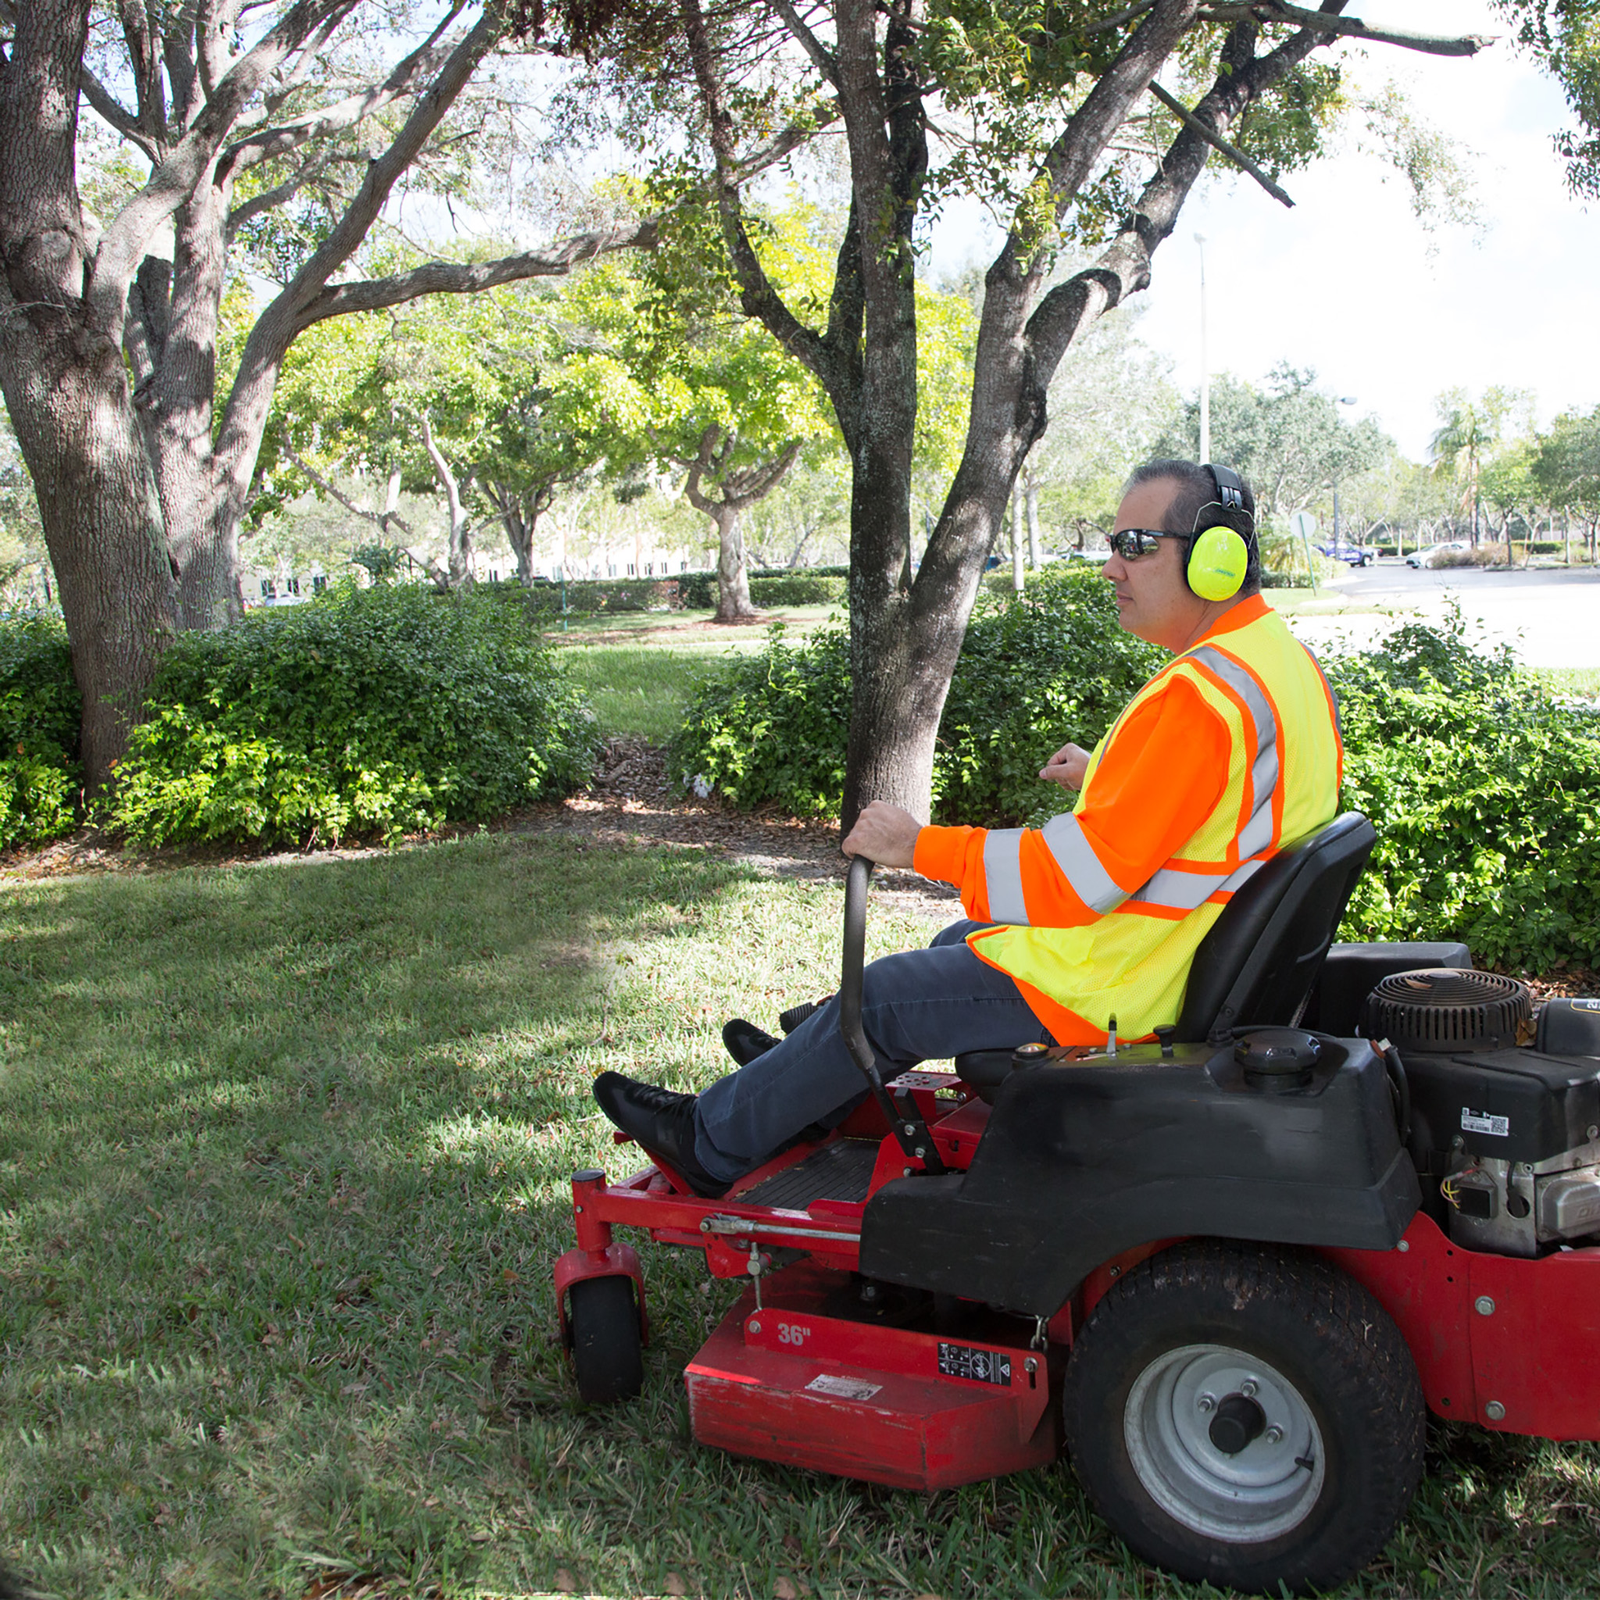 A garthener wearing a high visibility reflective vest and protective ear muffs while he is mowing the lawn with a red truck